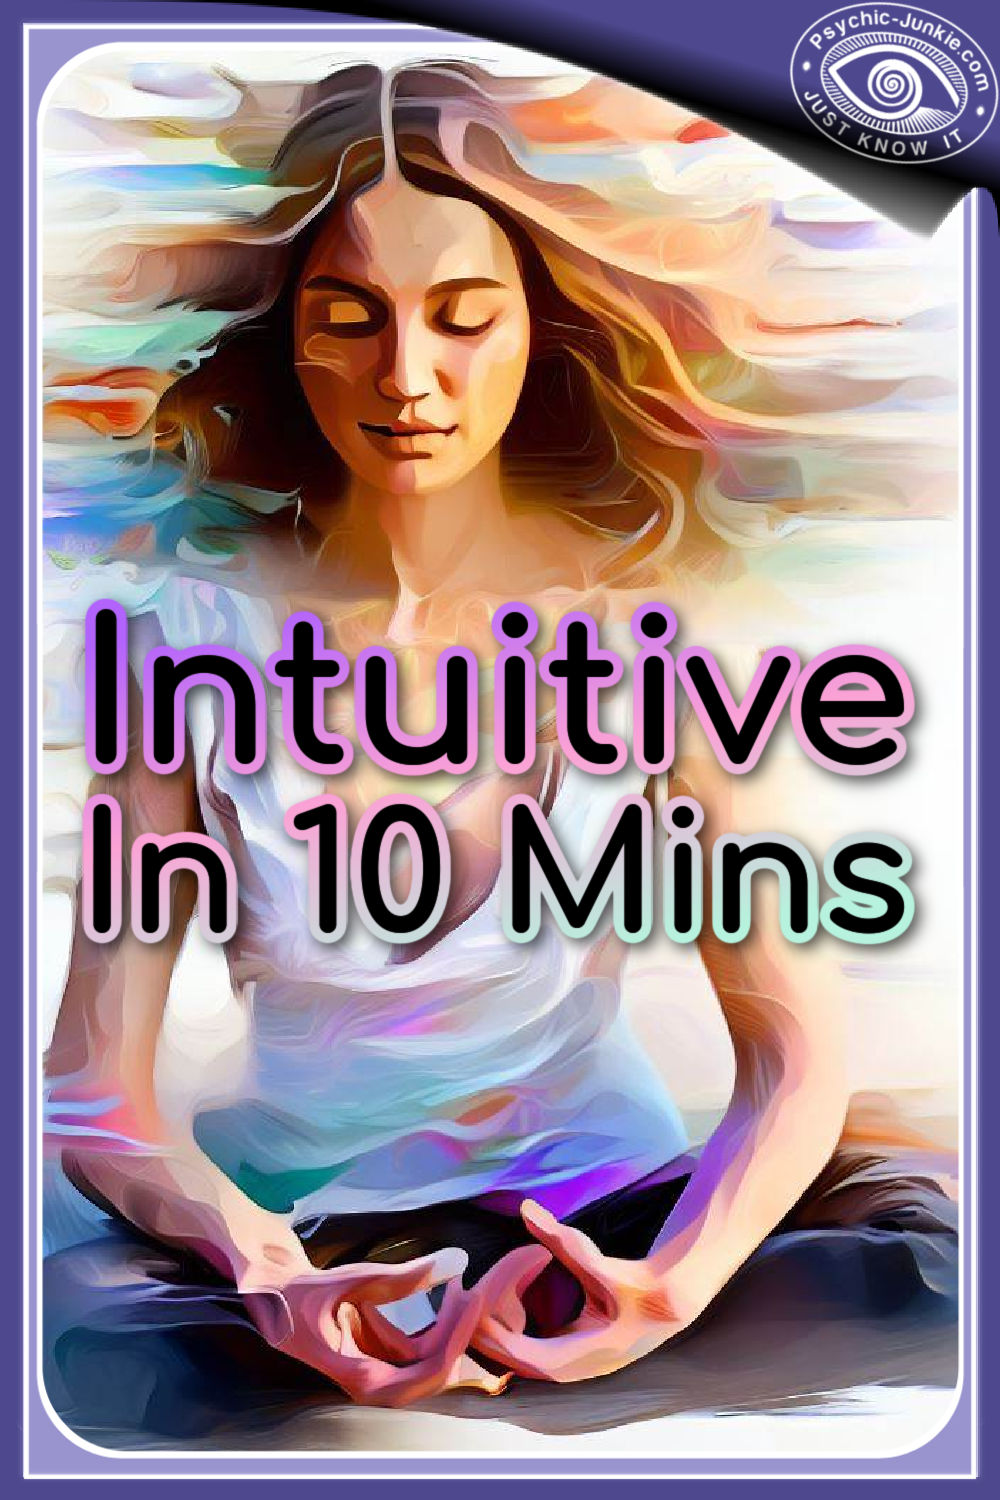 Learn How To Develop Your Intuition In 10 Minutes!